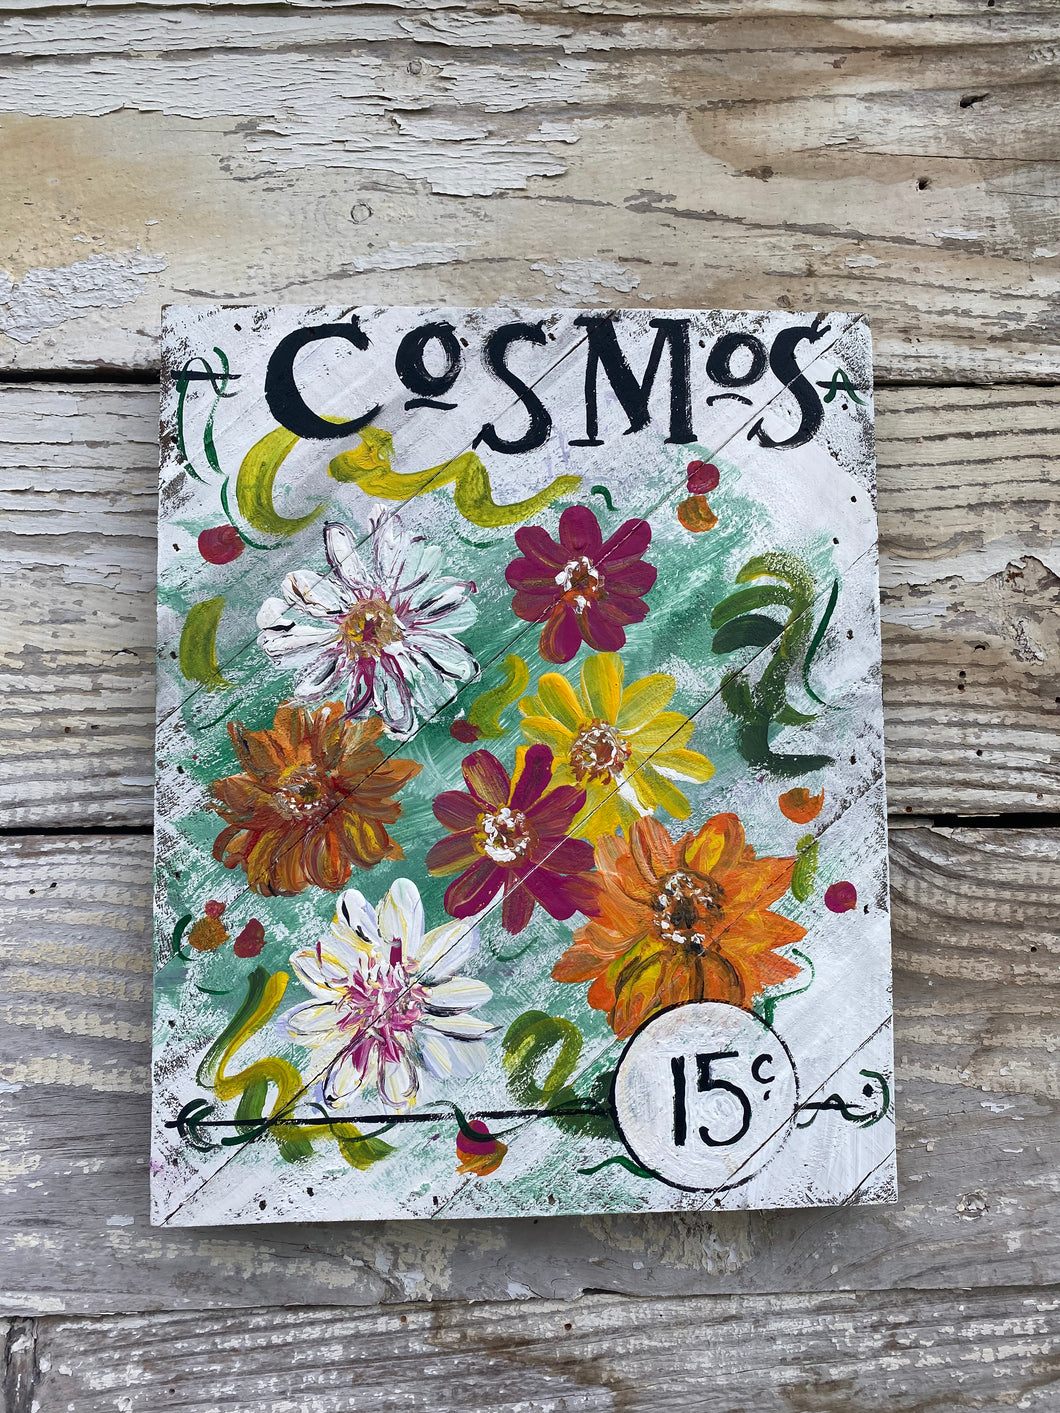 Seed Packet Cosmos- Hand-painted Wooden Square Pallet Wood Wall Decor